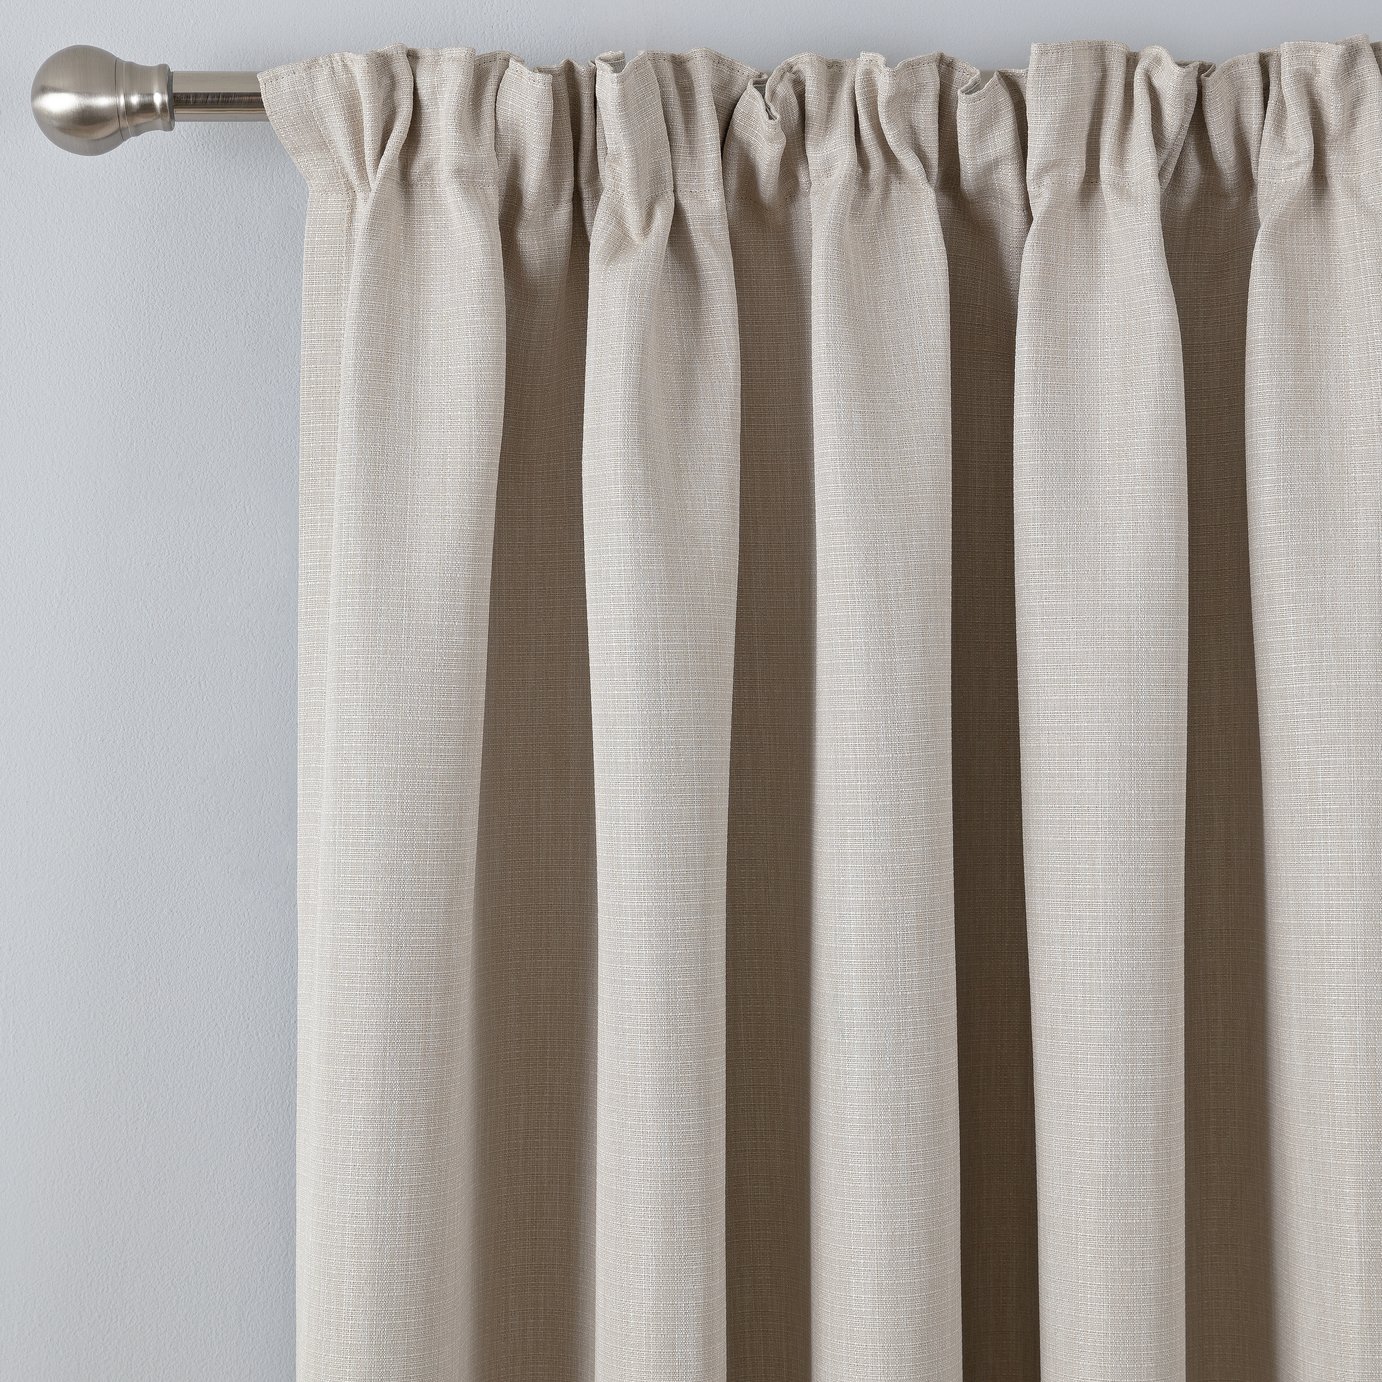 Argos Home Thermal Blackout Pencil Pleat Curtains - Natural